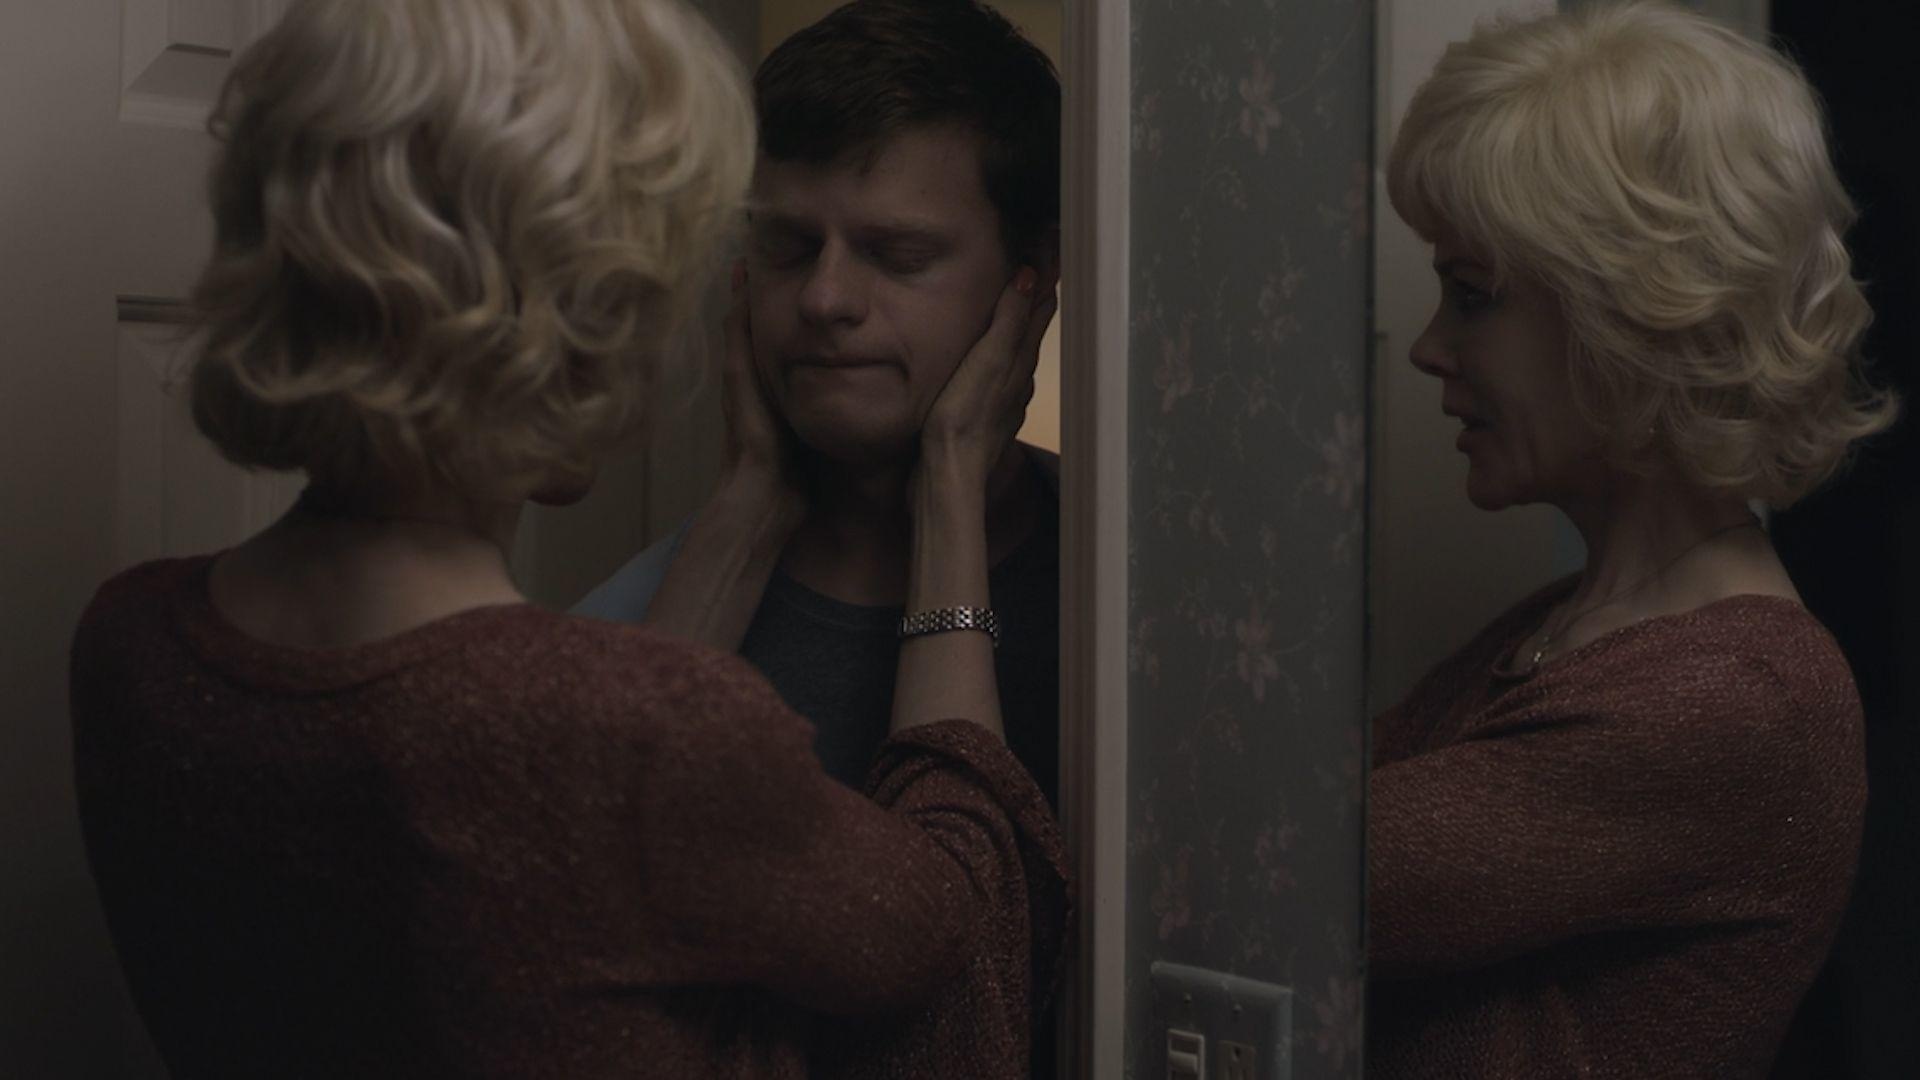 Boy Erased, Movie wallpapers, Conversion therapy, LGBT film, 1920x1080 Full HD Desktop